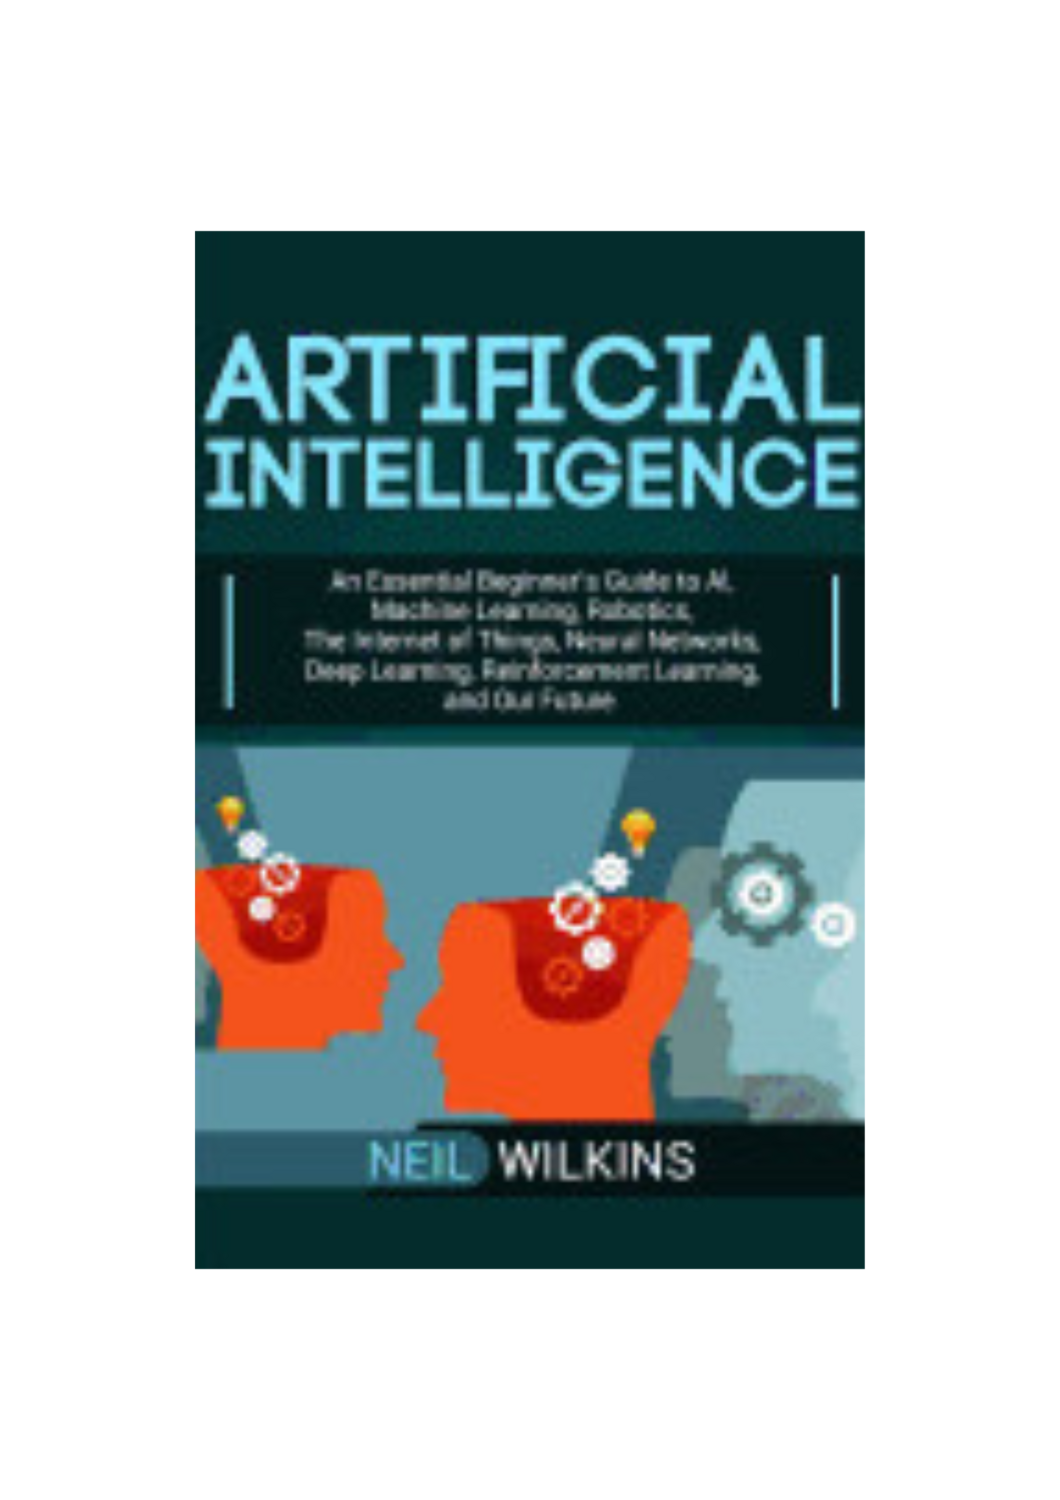 Artificial Intelligence: An Essential Beginner's Guide to AI, Machine Learning, Robotics, the Internet of Things